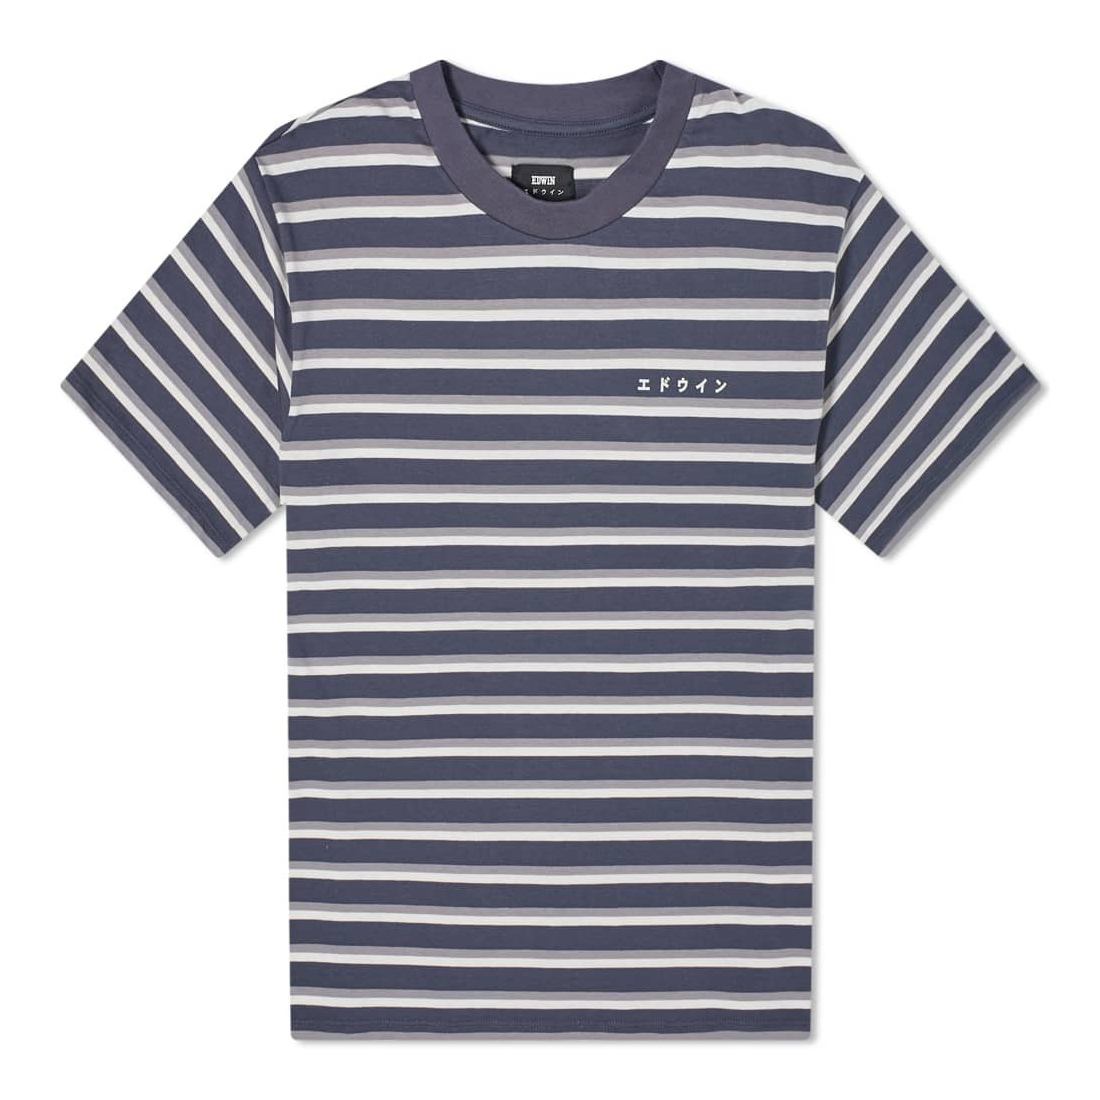 Edwin Quarter Tee - French Navy/Frost Grey